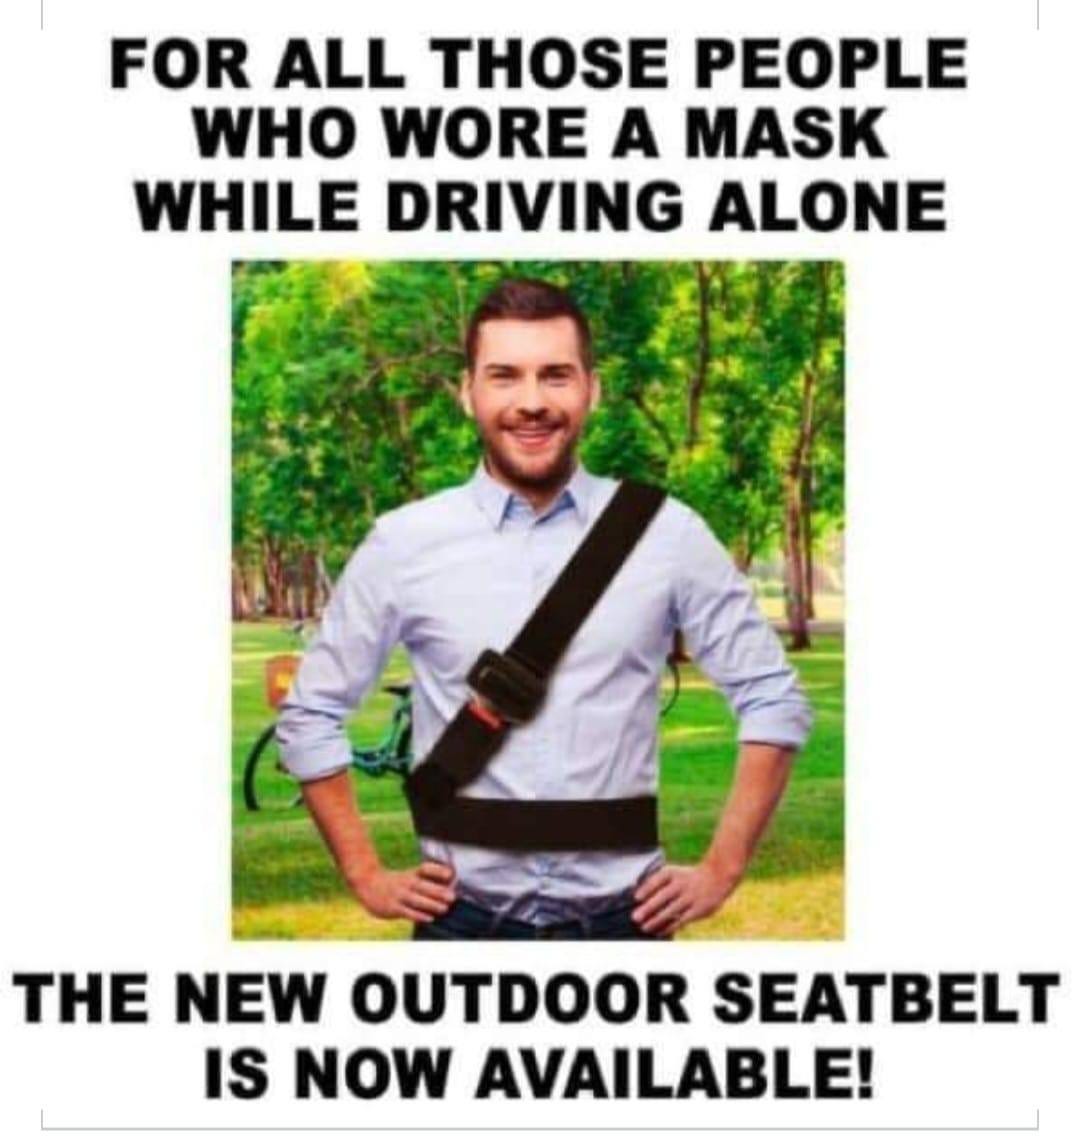 May be an image of 1 person, car and text that says 'FOR ALL THOSE PEOPLE WHO WORE A MASK WHILE DRIVING ALONE THE NEW OUTDOOR SEATBELT IS NOW AVAILABLE!'